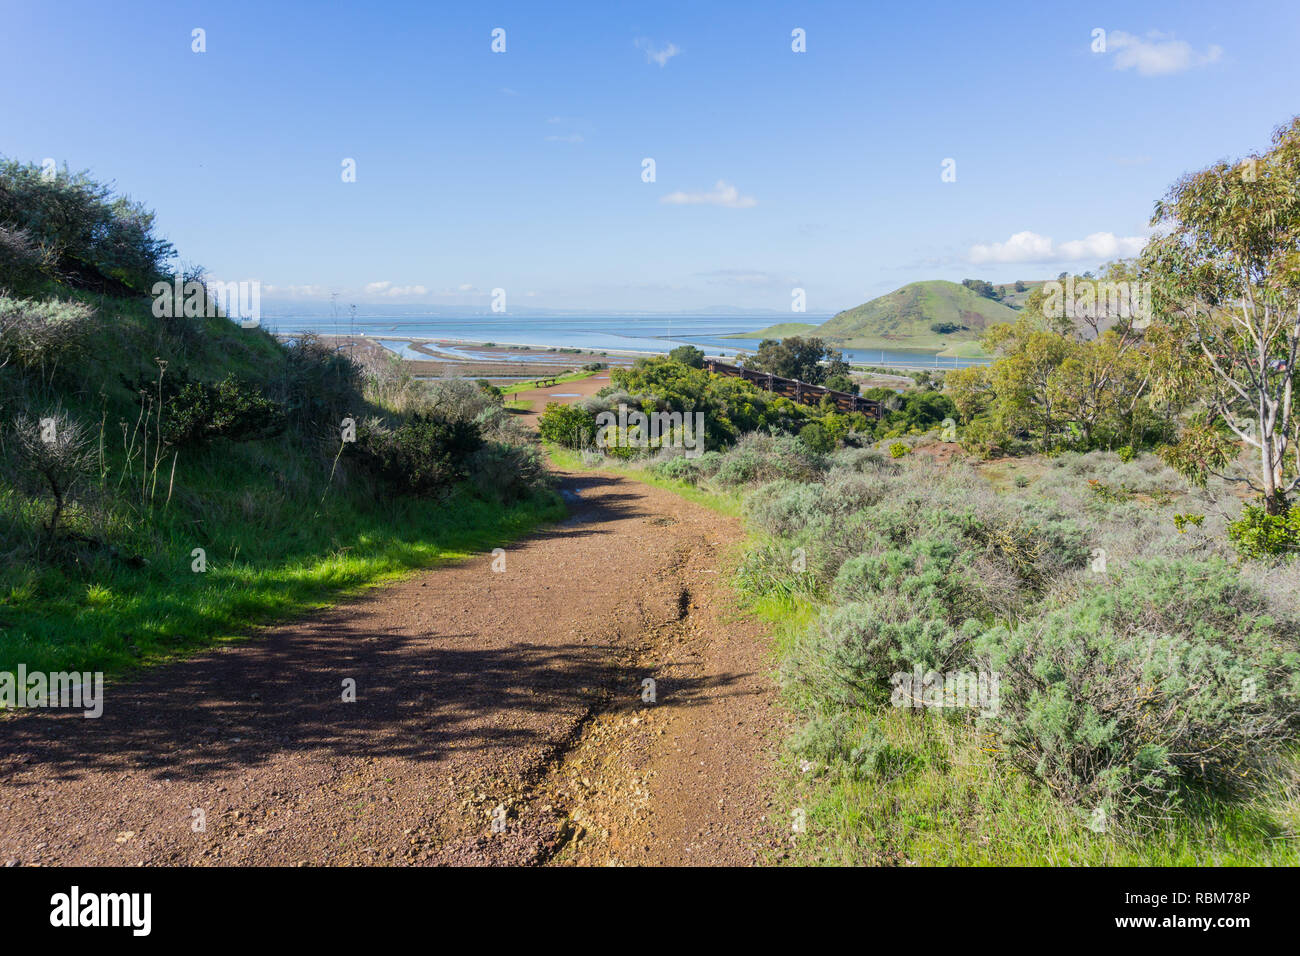 Trail in Don Edwards wildlife refuge, Dumbarton bridge and Coyote Hills Regional Park in the background, Fremont, San Francisco bay area, California Stock Photo